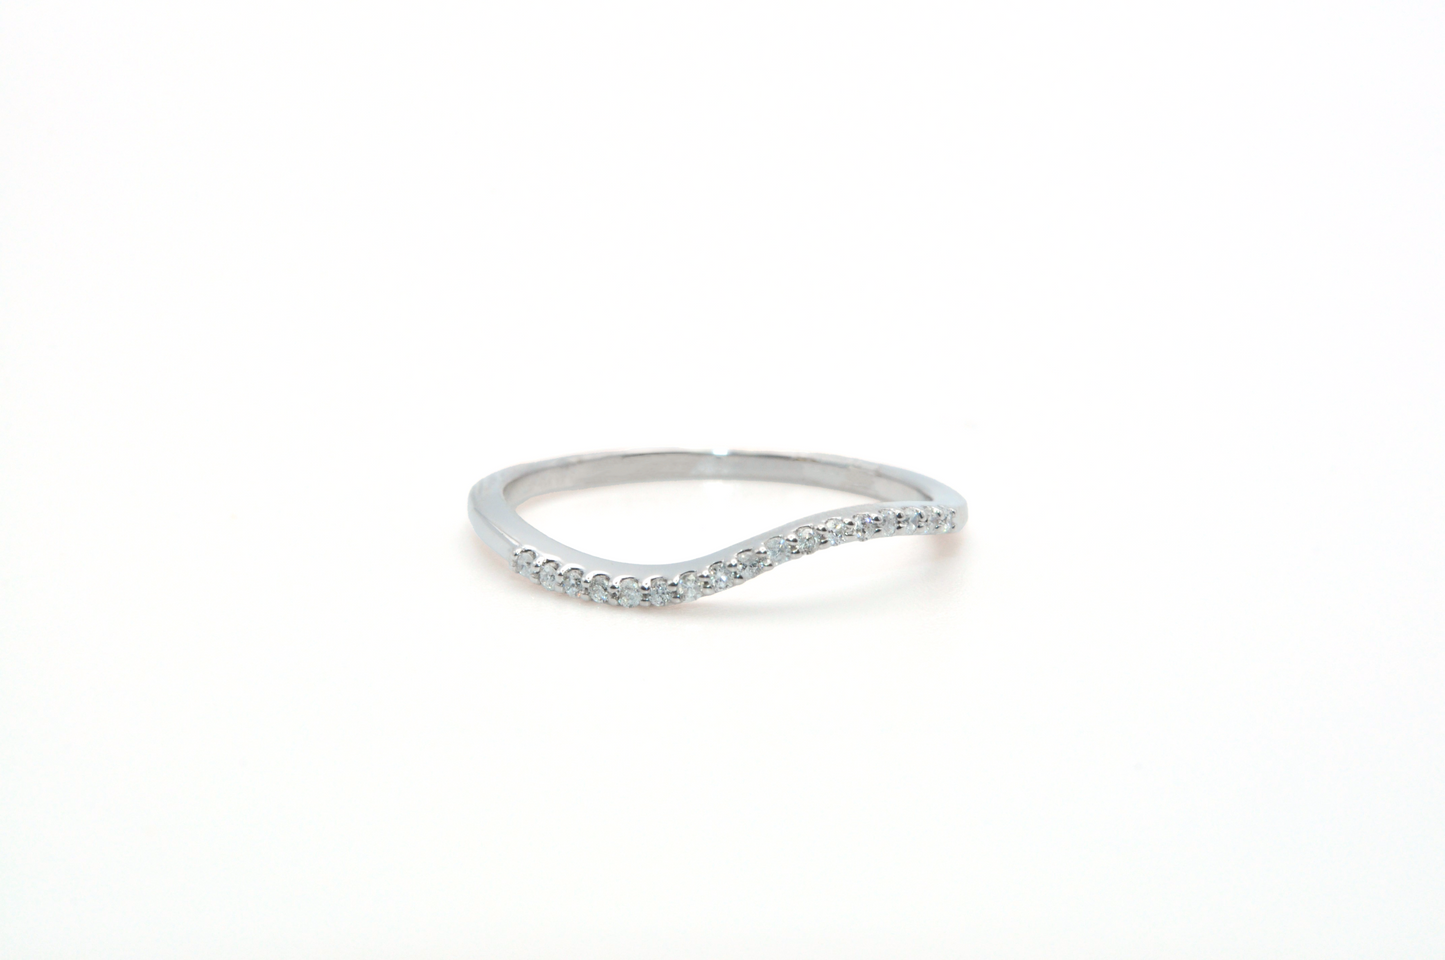 Thin White Gold Swirl Stackable Ring with Diamond Accents